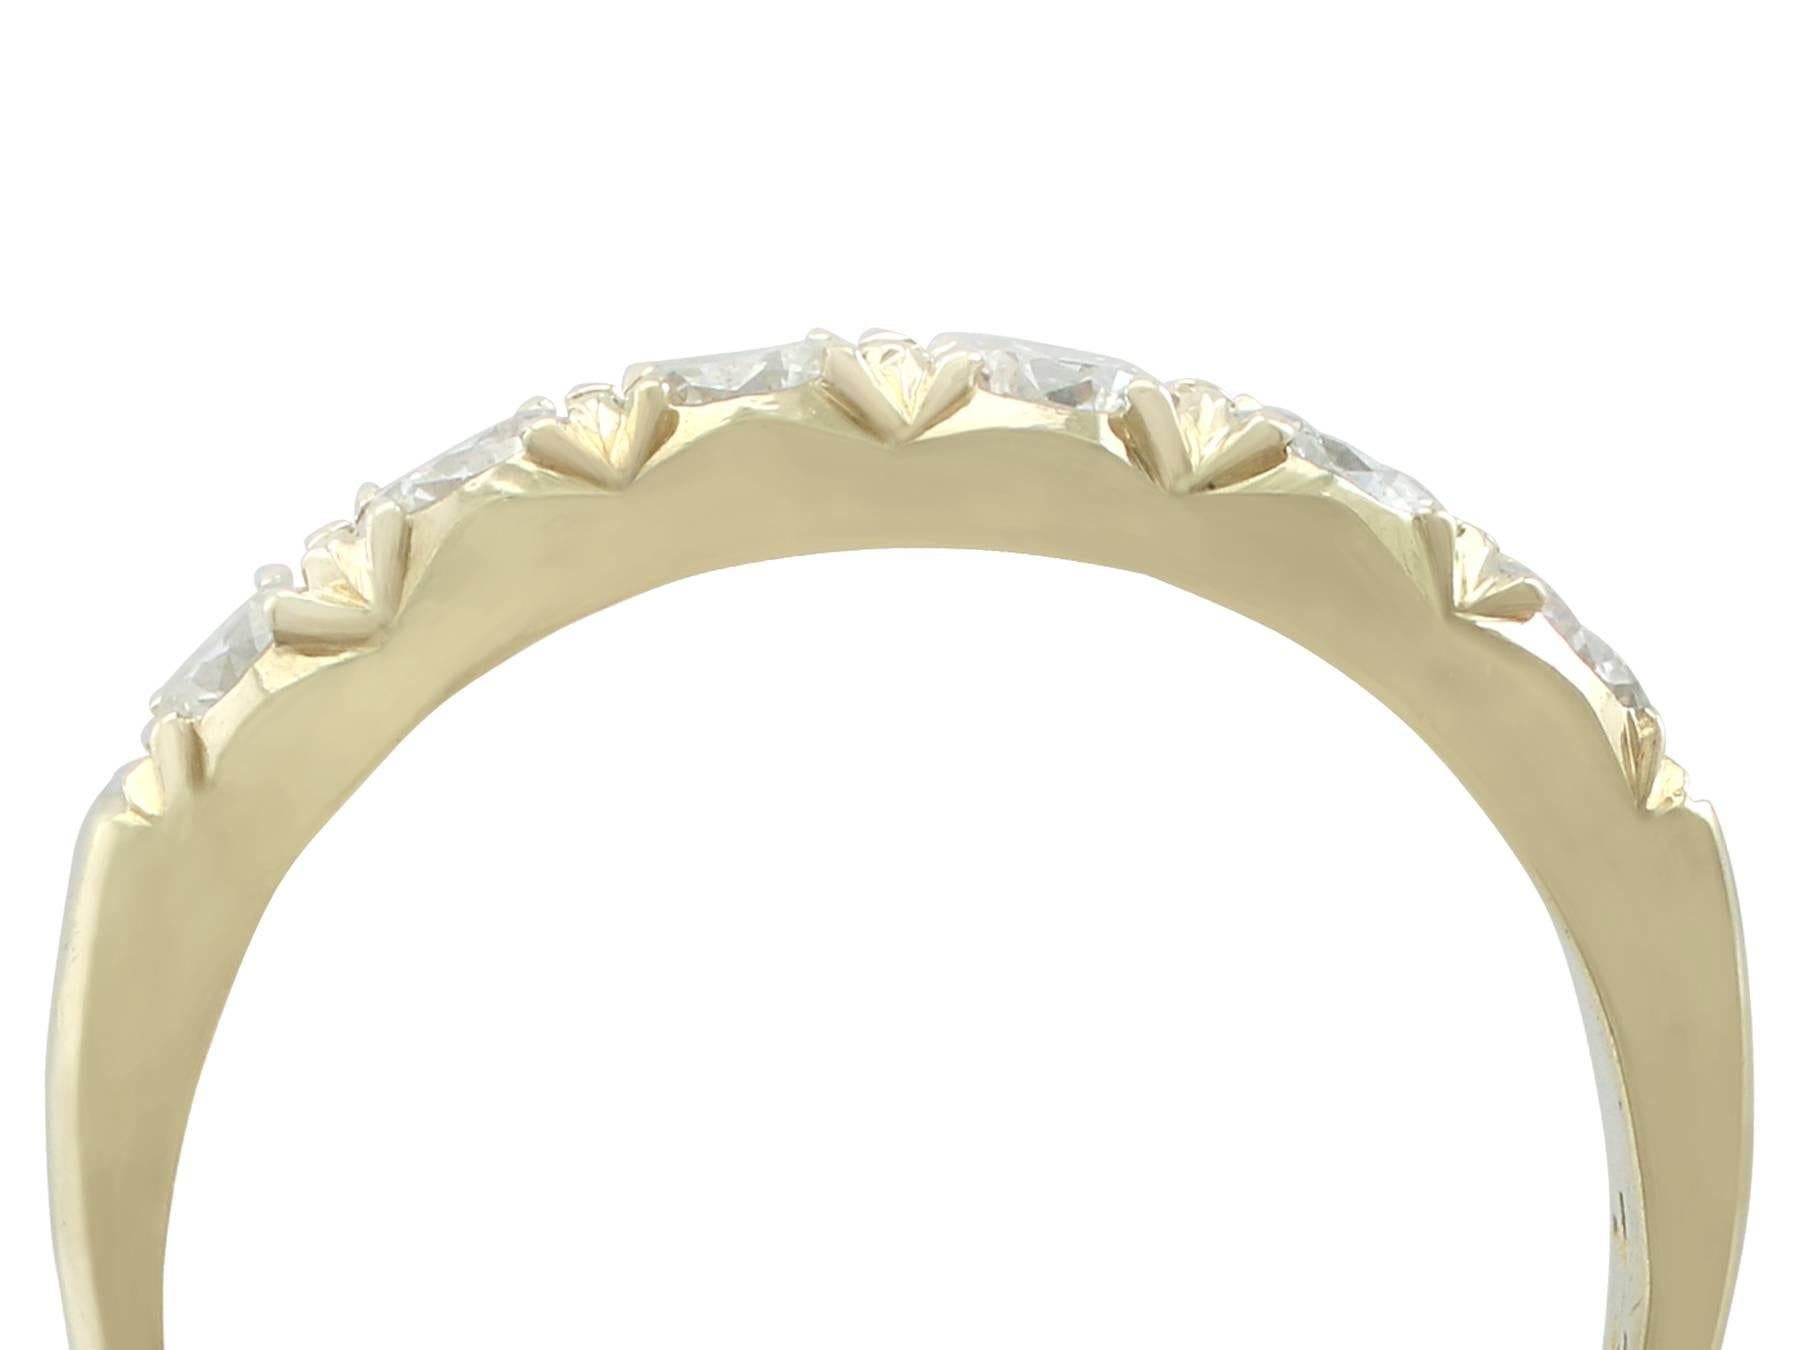 An impressive vintage 0.96 carat diamond and 18 karat yellow gold half eternity ring; part of our diverse antique jewelry and estate jewelry collections

This fine and impressive six stone diamond ring has been crafted in 18k yellow gold.

The